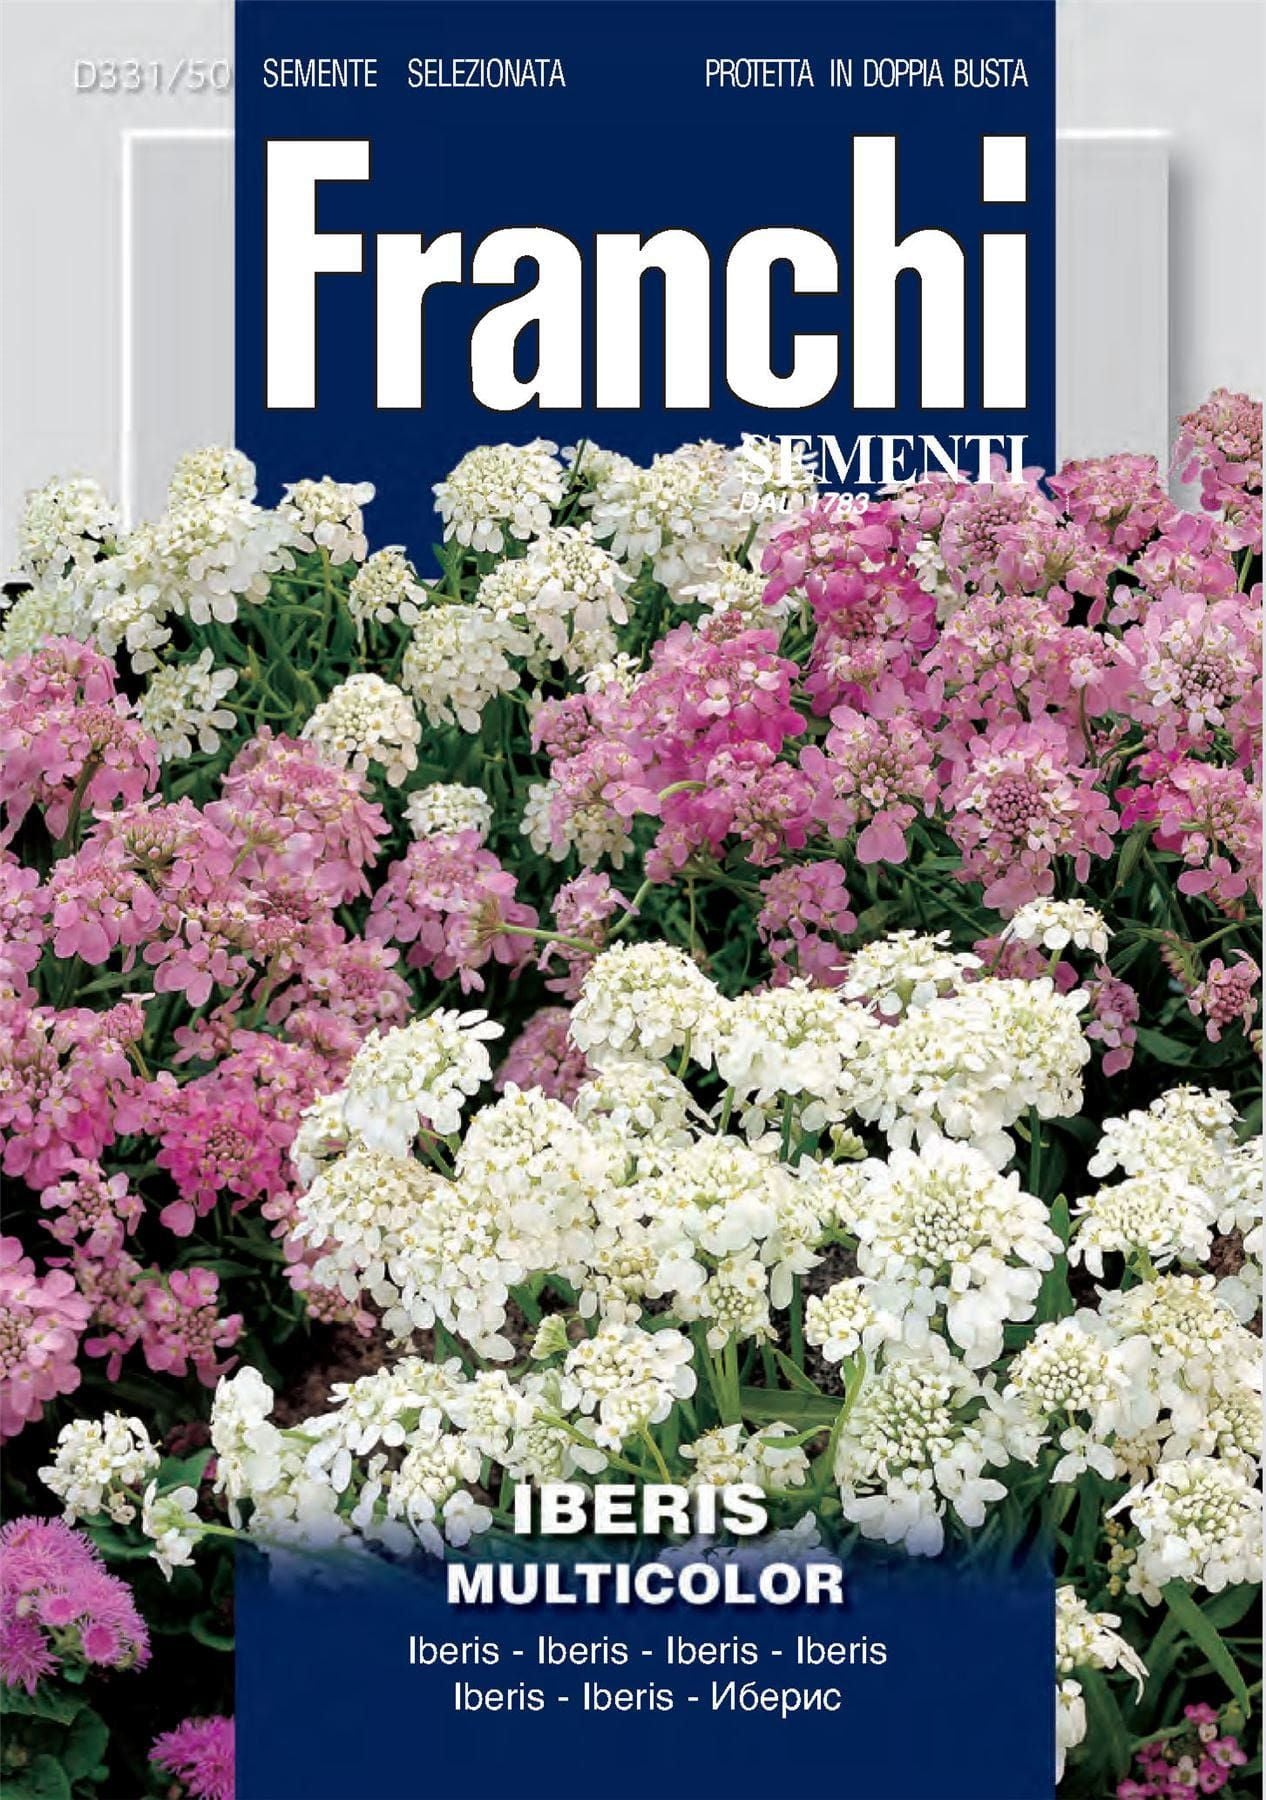 Franchi Seeds of Italy - Flower - FDBF_ 331-50 - Iberis multicolour - Candytuft - Seeds